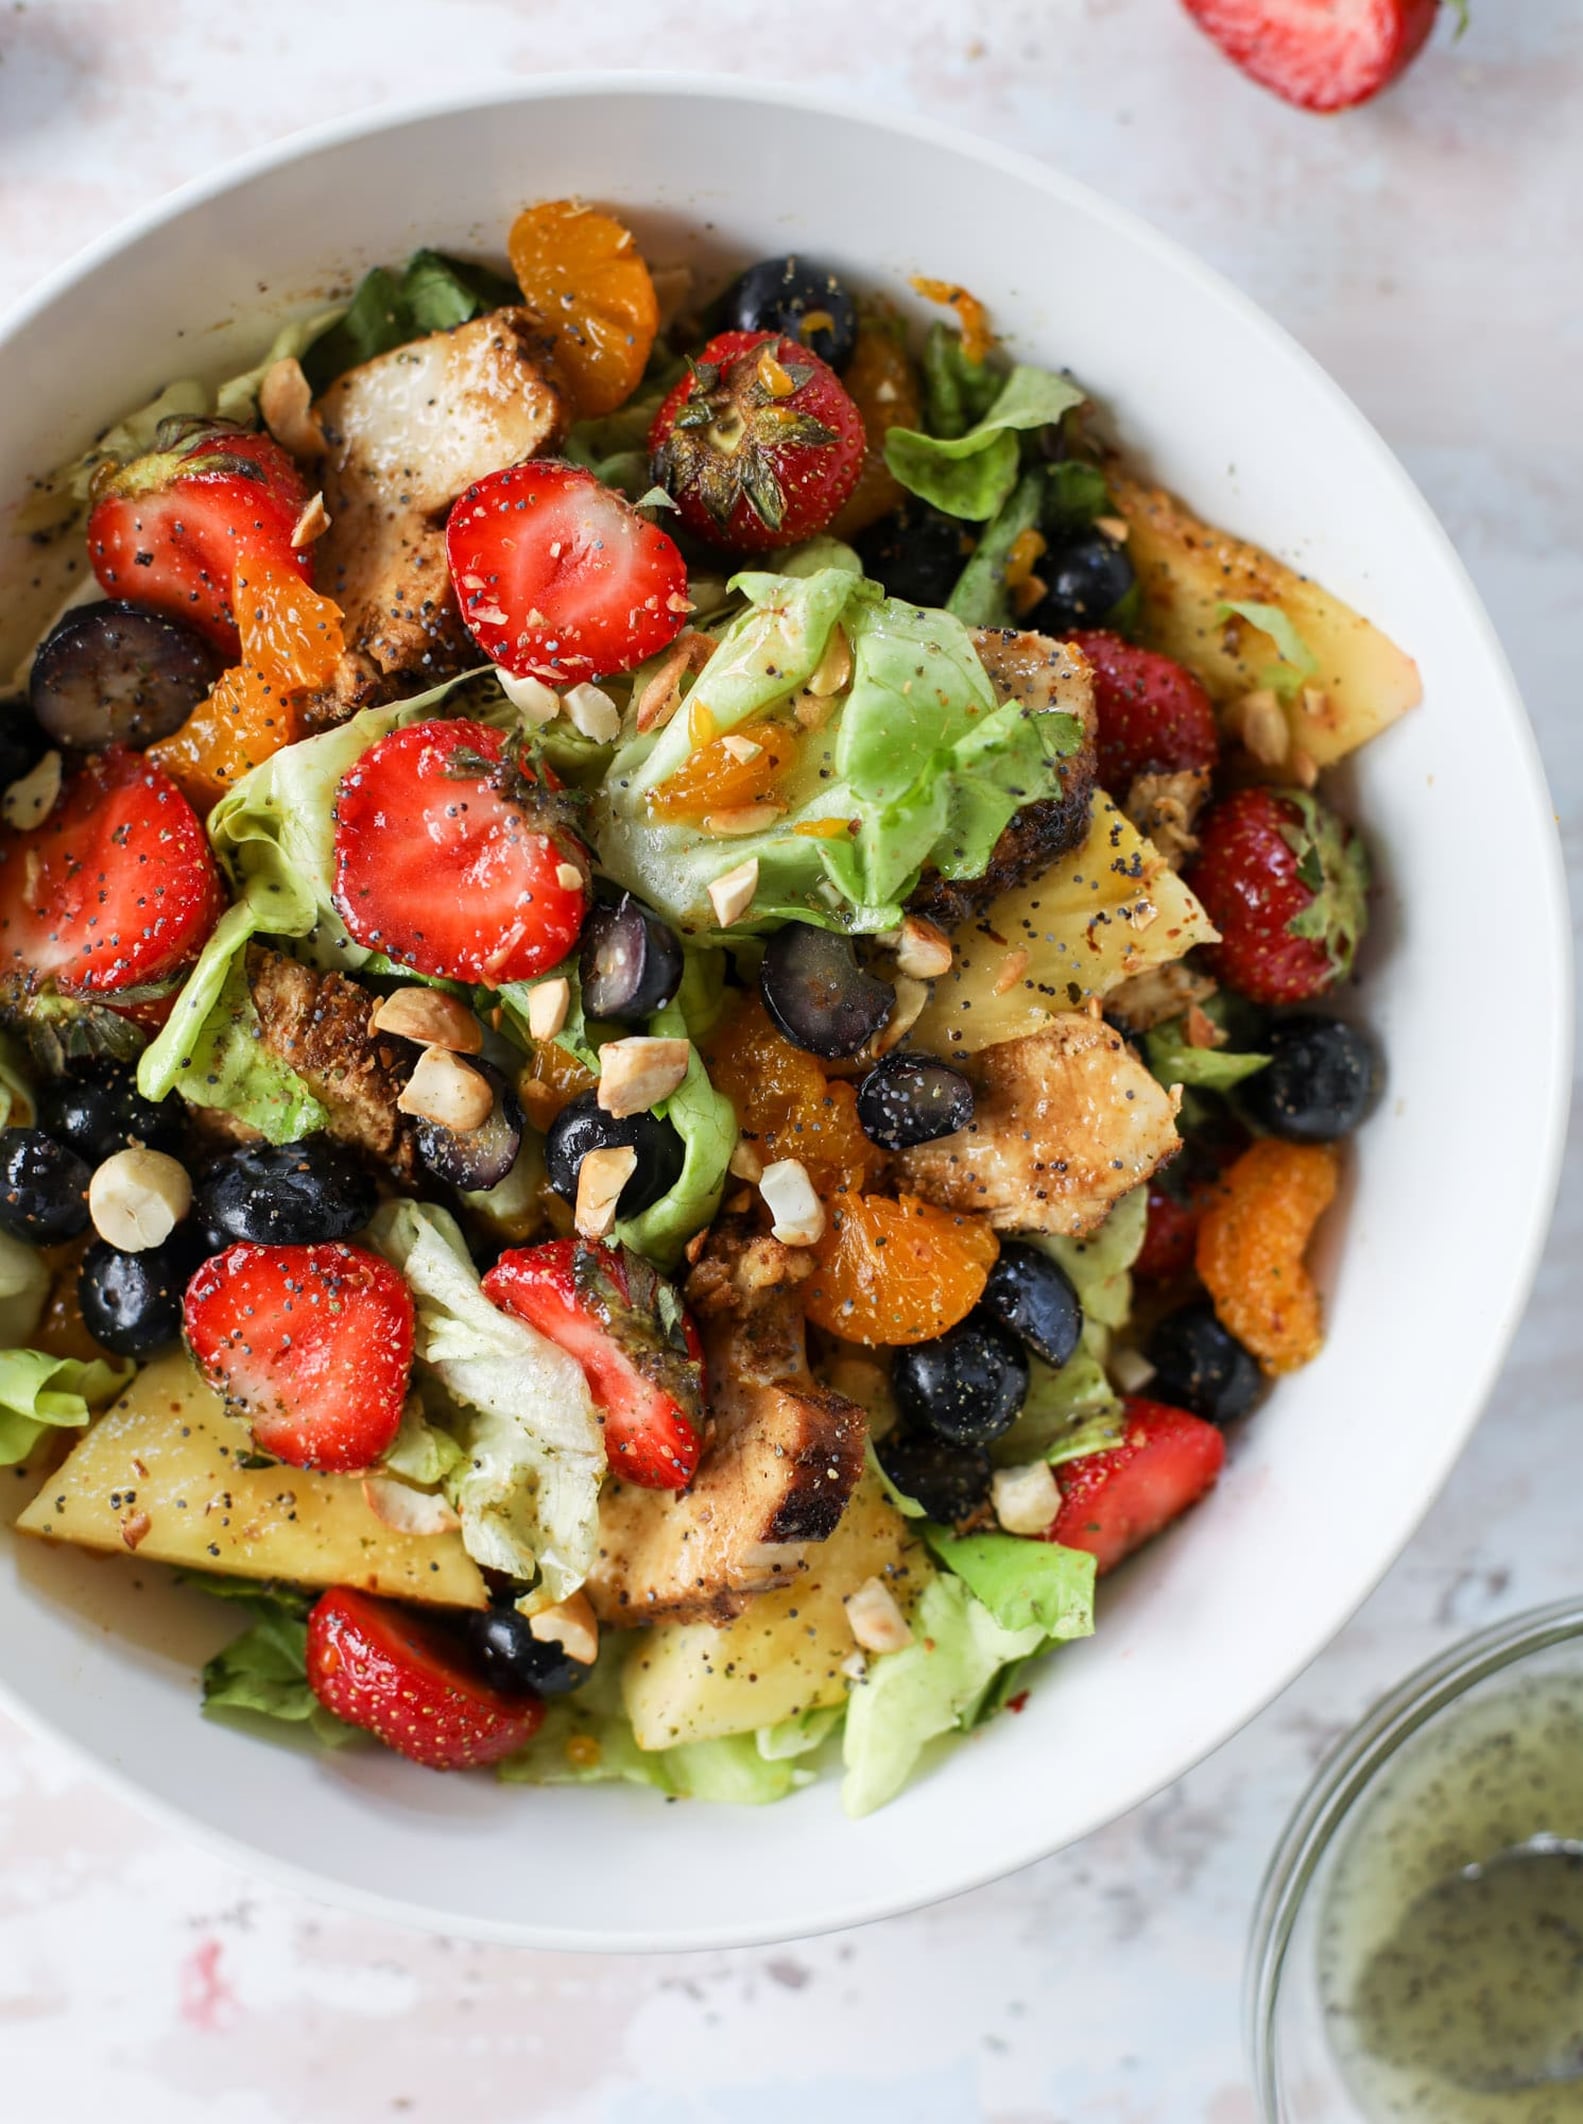 The Best Summer Salad Recipes That Include Strawberries | POPSUGAR Food